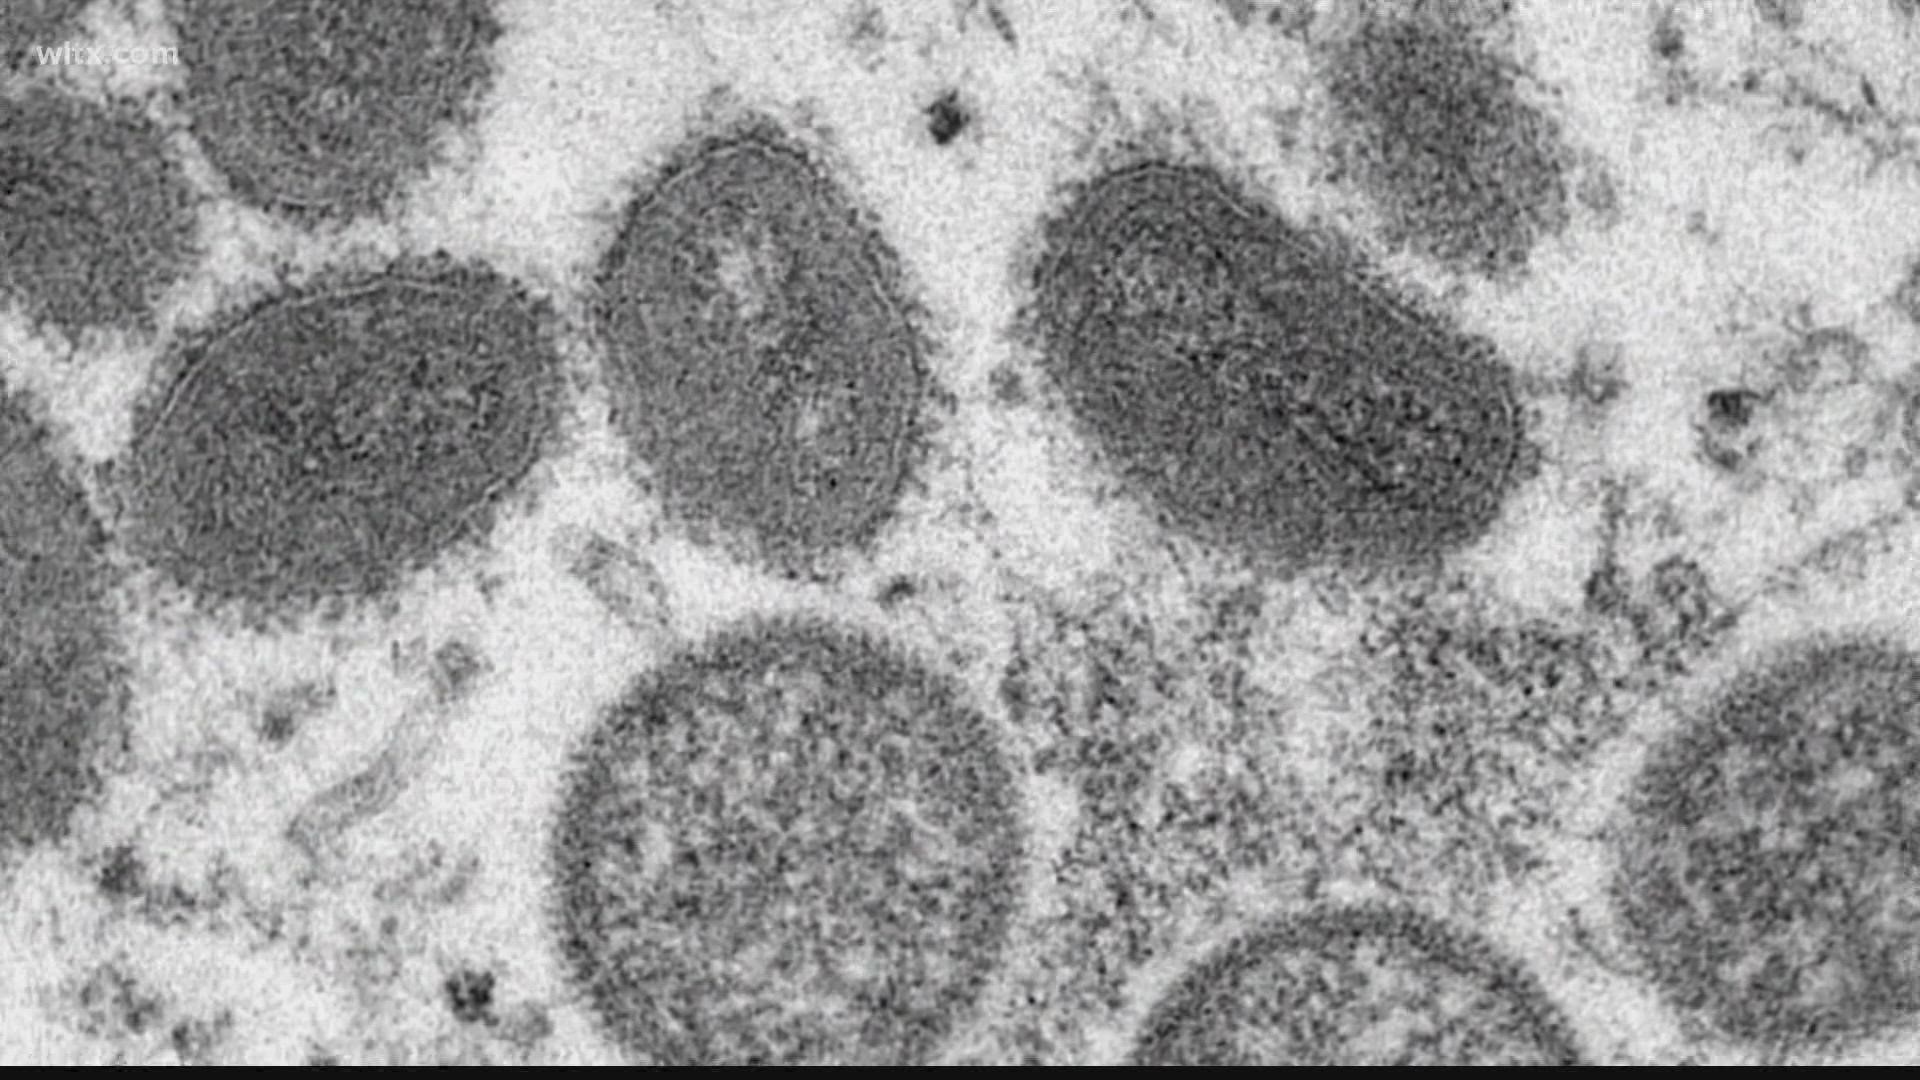 DHEC has now confirmed two cases of monkey pox in South Carolina.